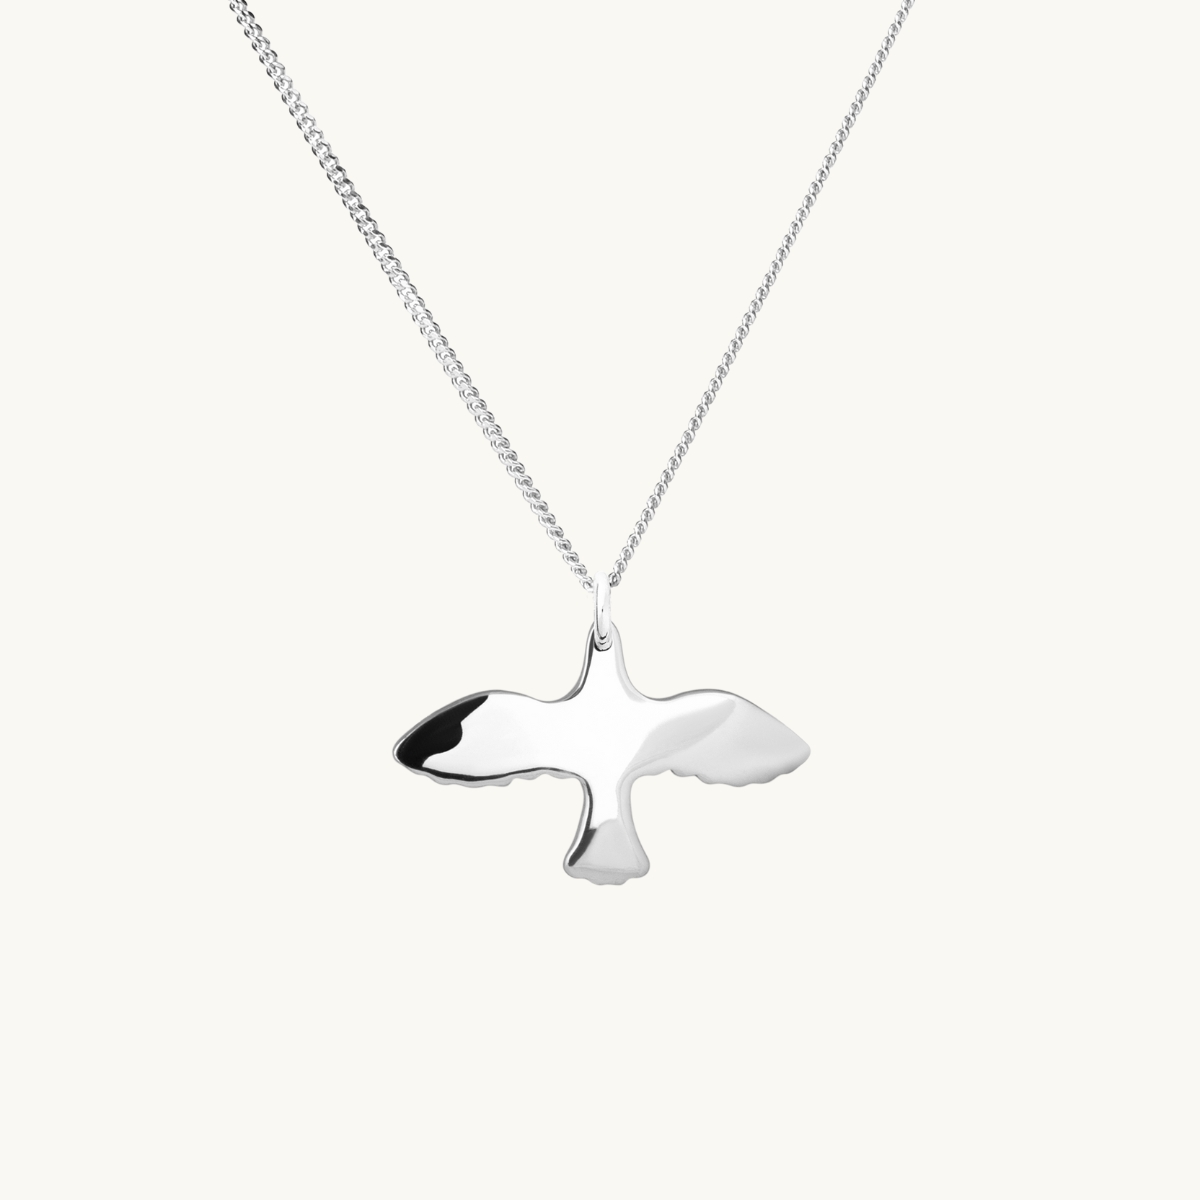 SILVER SMALL DOVE NECKLACE - 40 CM in the group SHOP / NECKLACES at EMMA ISRAELSSON (neck030-40)